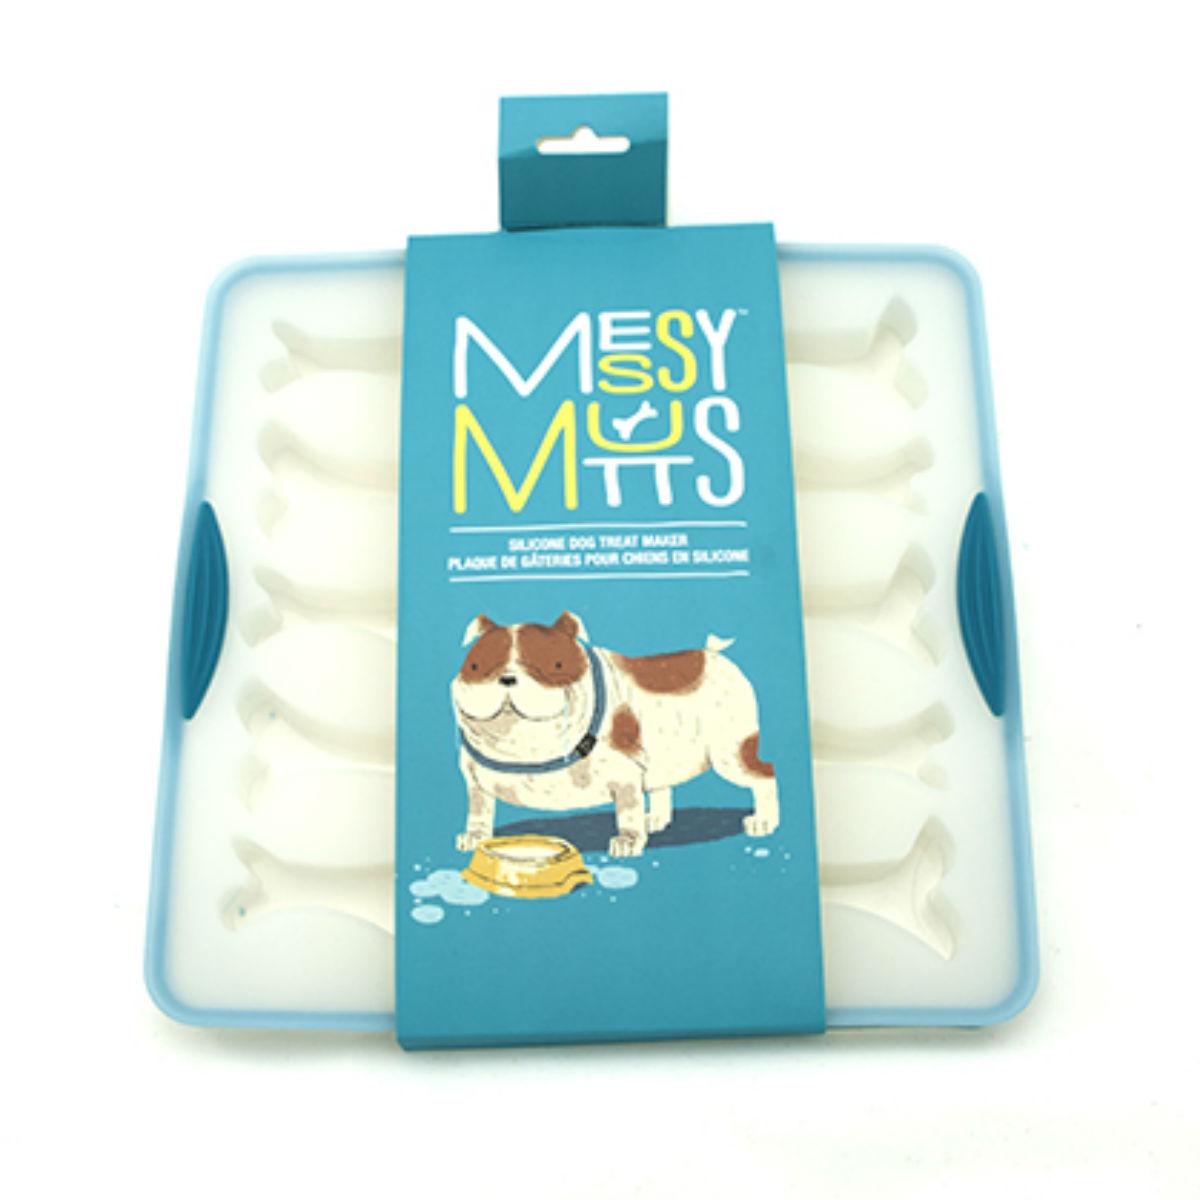 Messy Mutts Silicone Dog Treat Maker